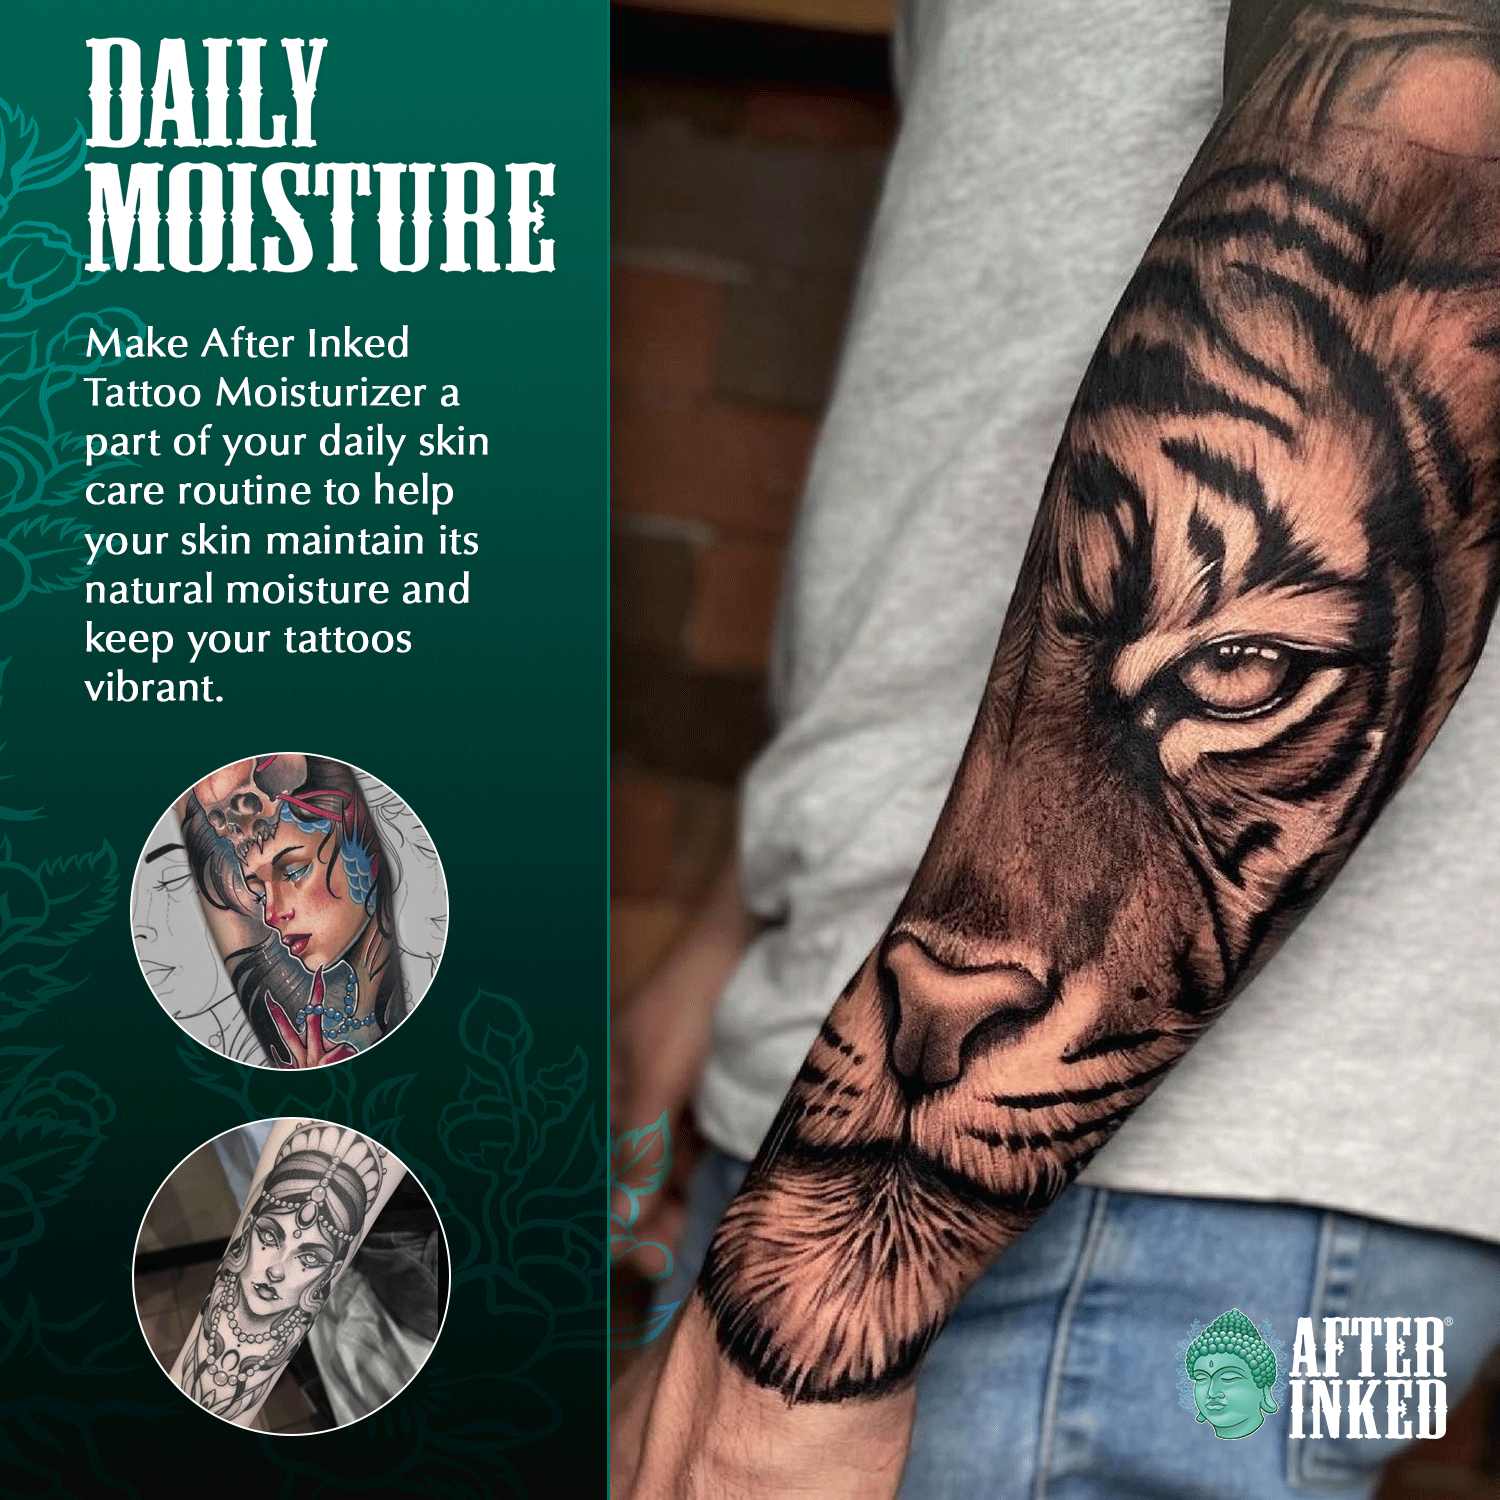 Daily moisture. Make After Inked tattoo moisturizer a part of your daily skin care routine to help your skin maintain its natural moisture and keep your tattoos vibrant.